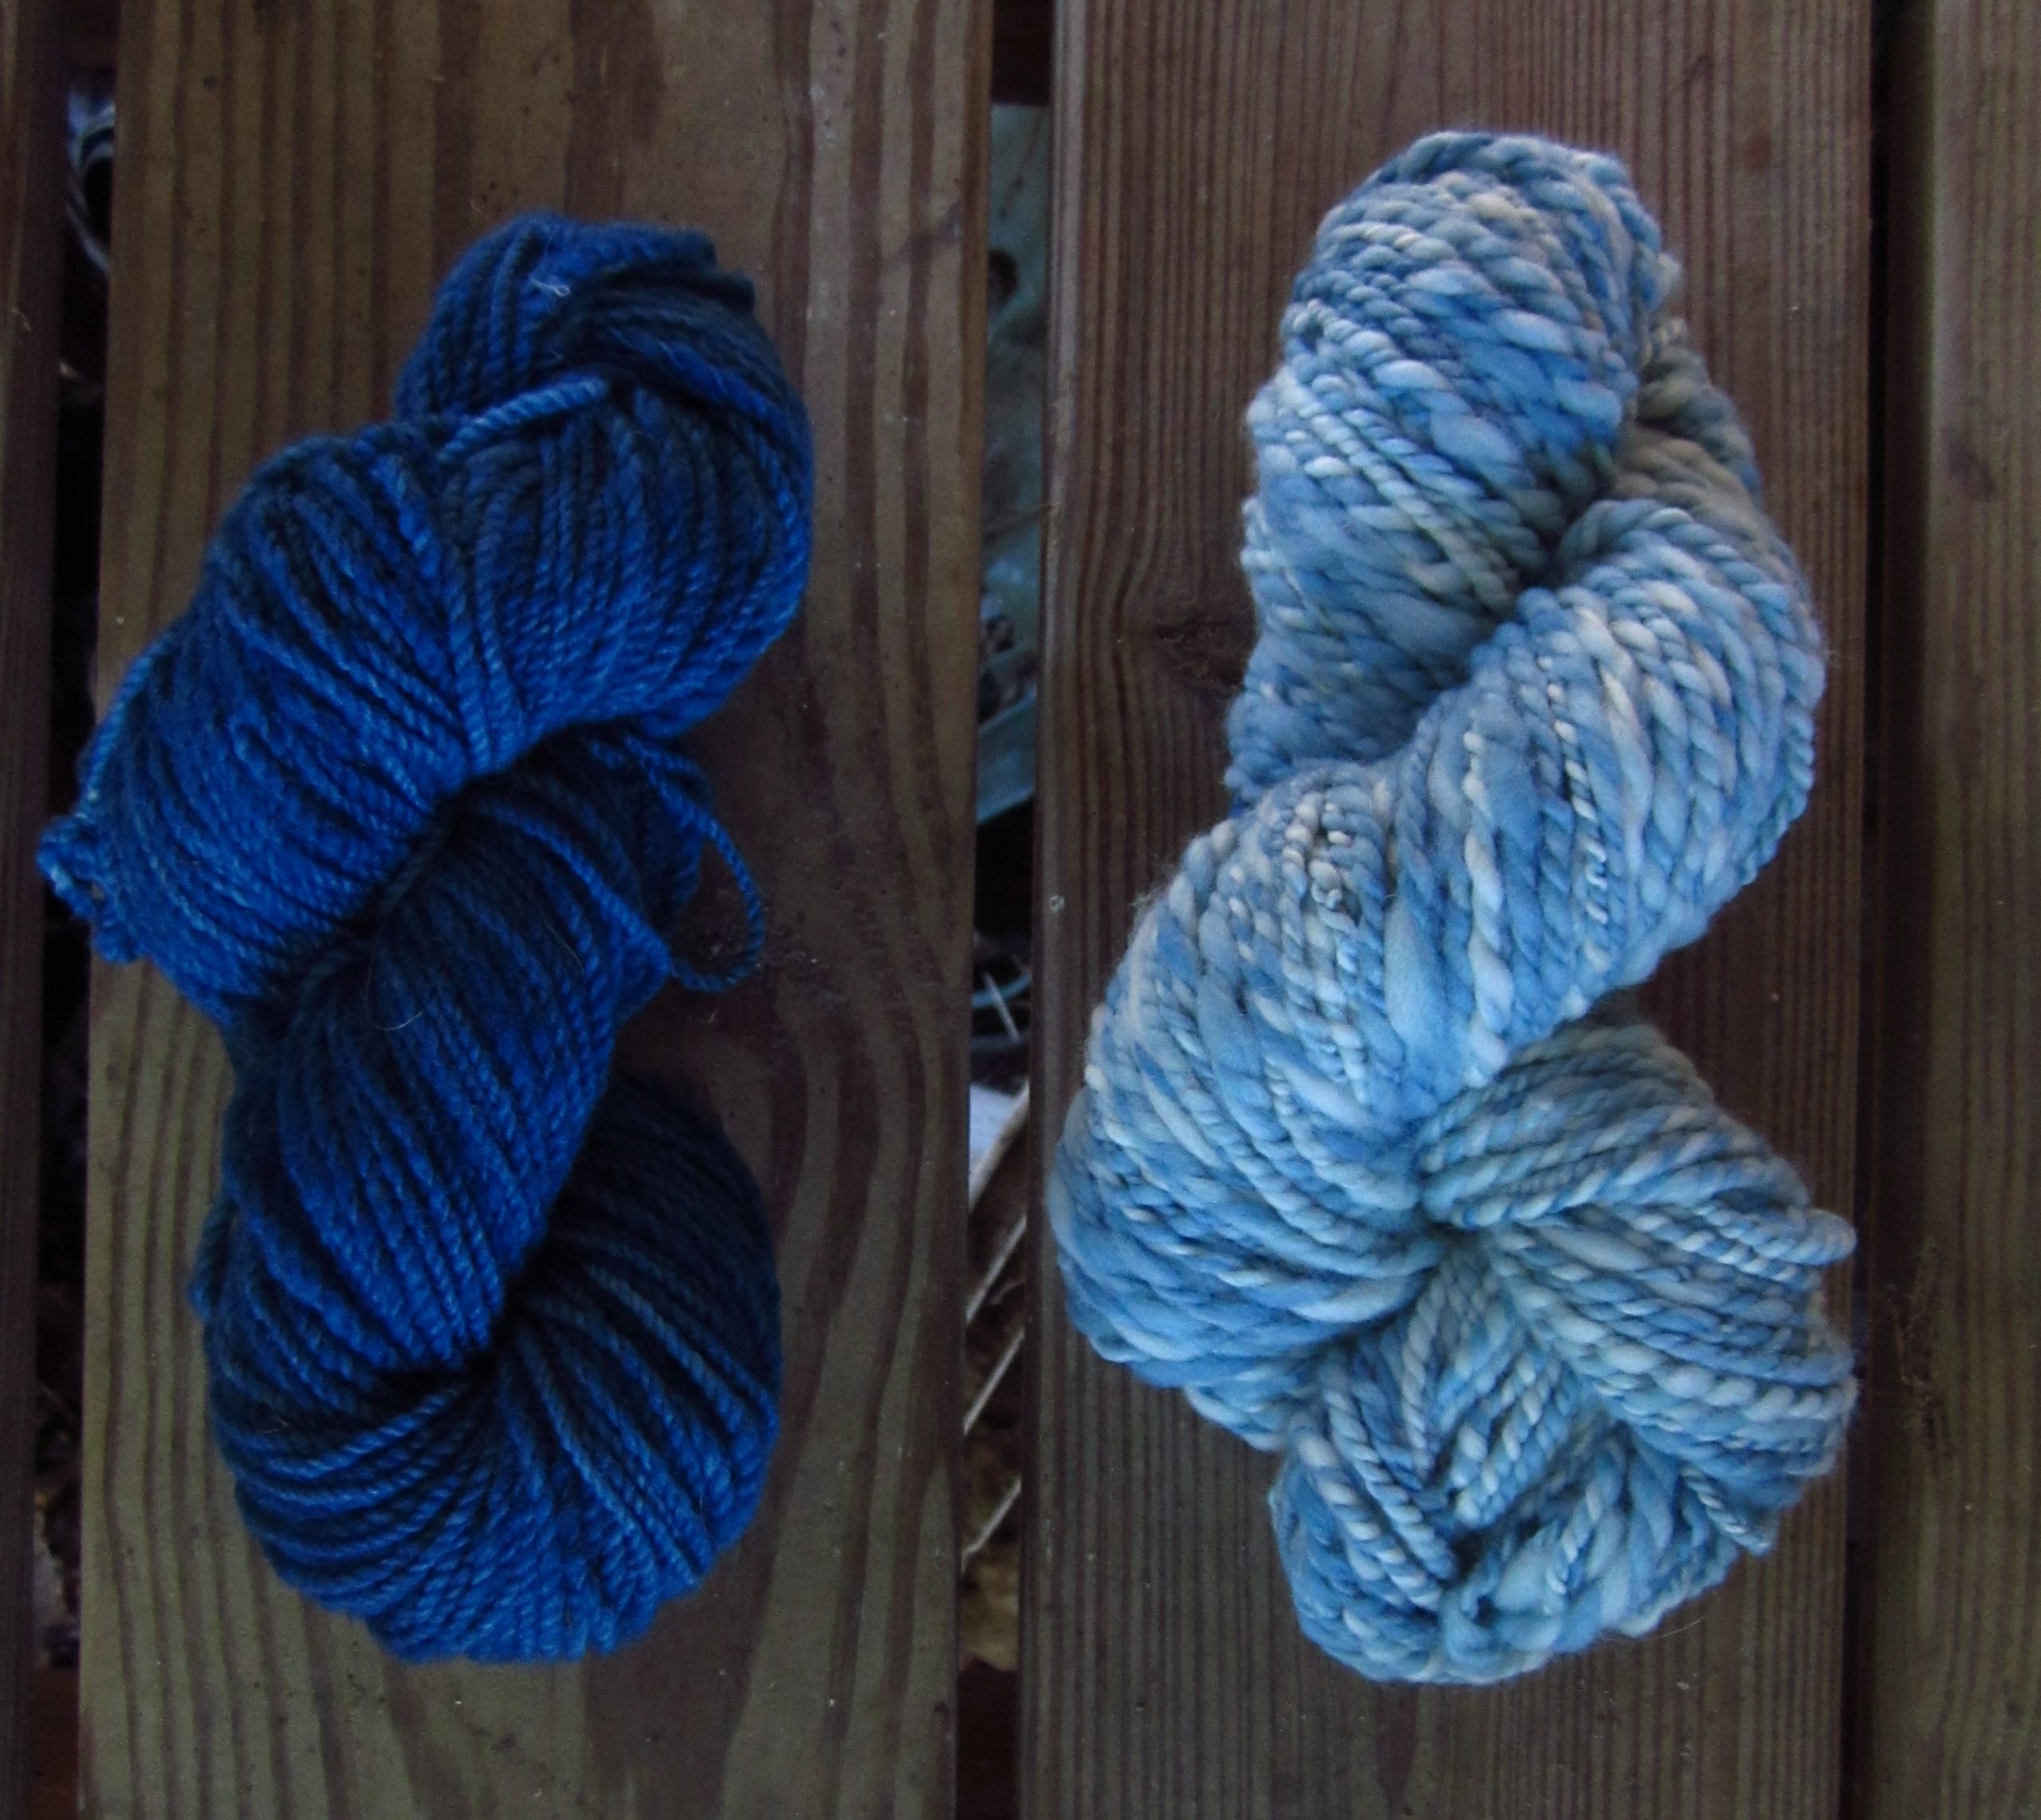 The Dark One Is The First Dye Bath And The Second Is Roving That Was Dyed Unevenly In The Second Batch And Then Spun.